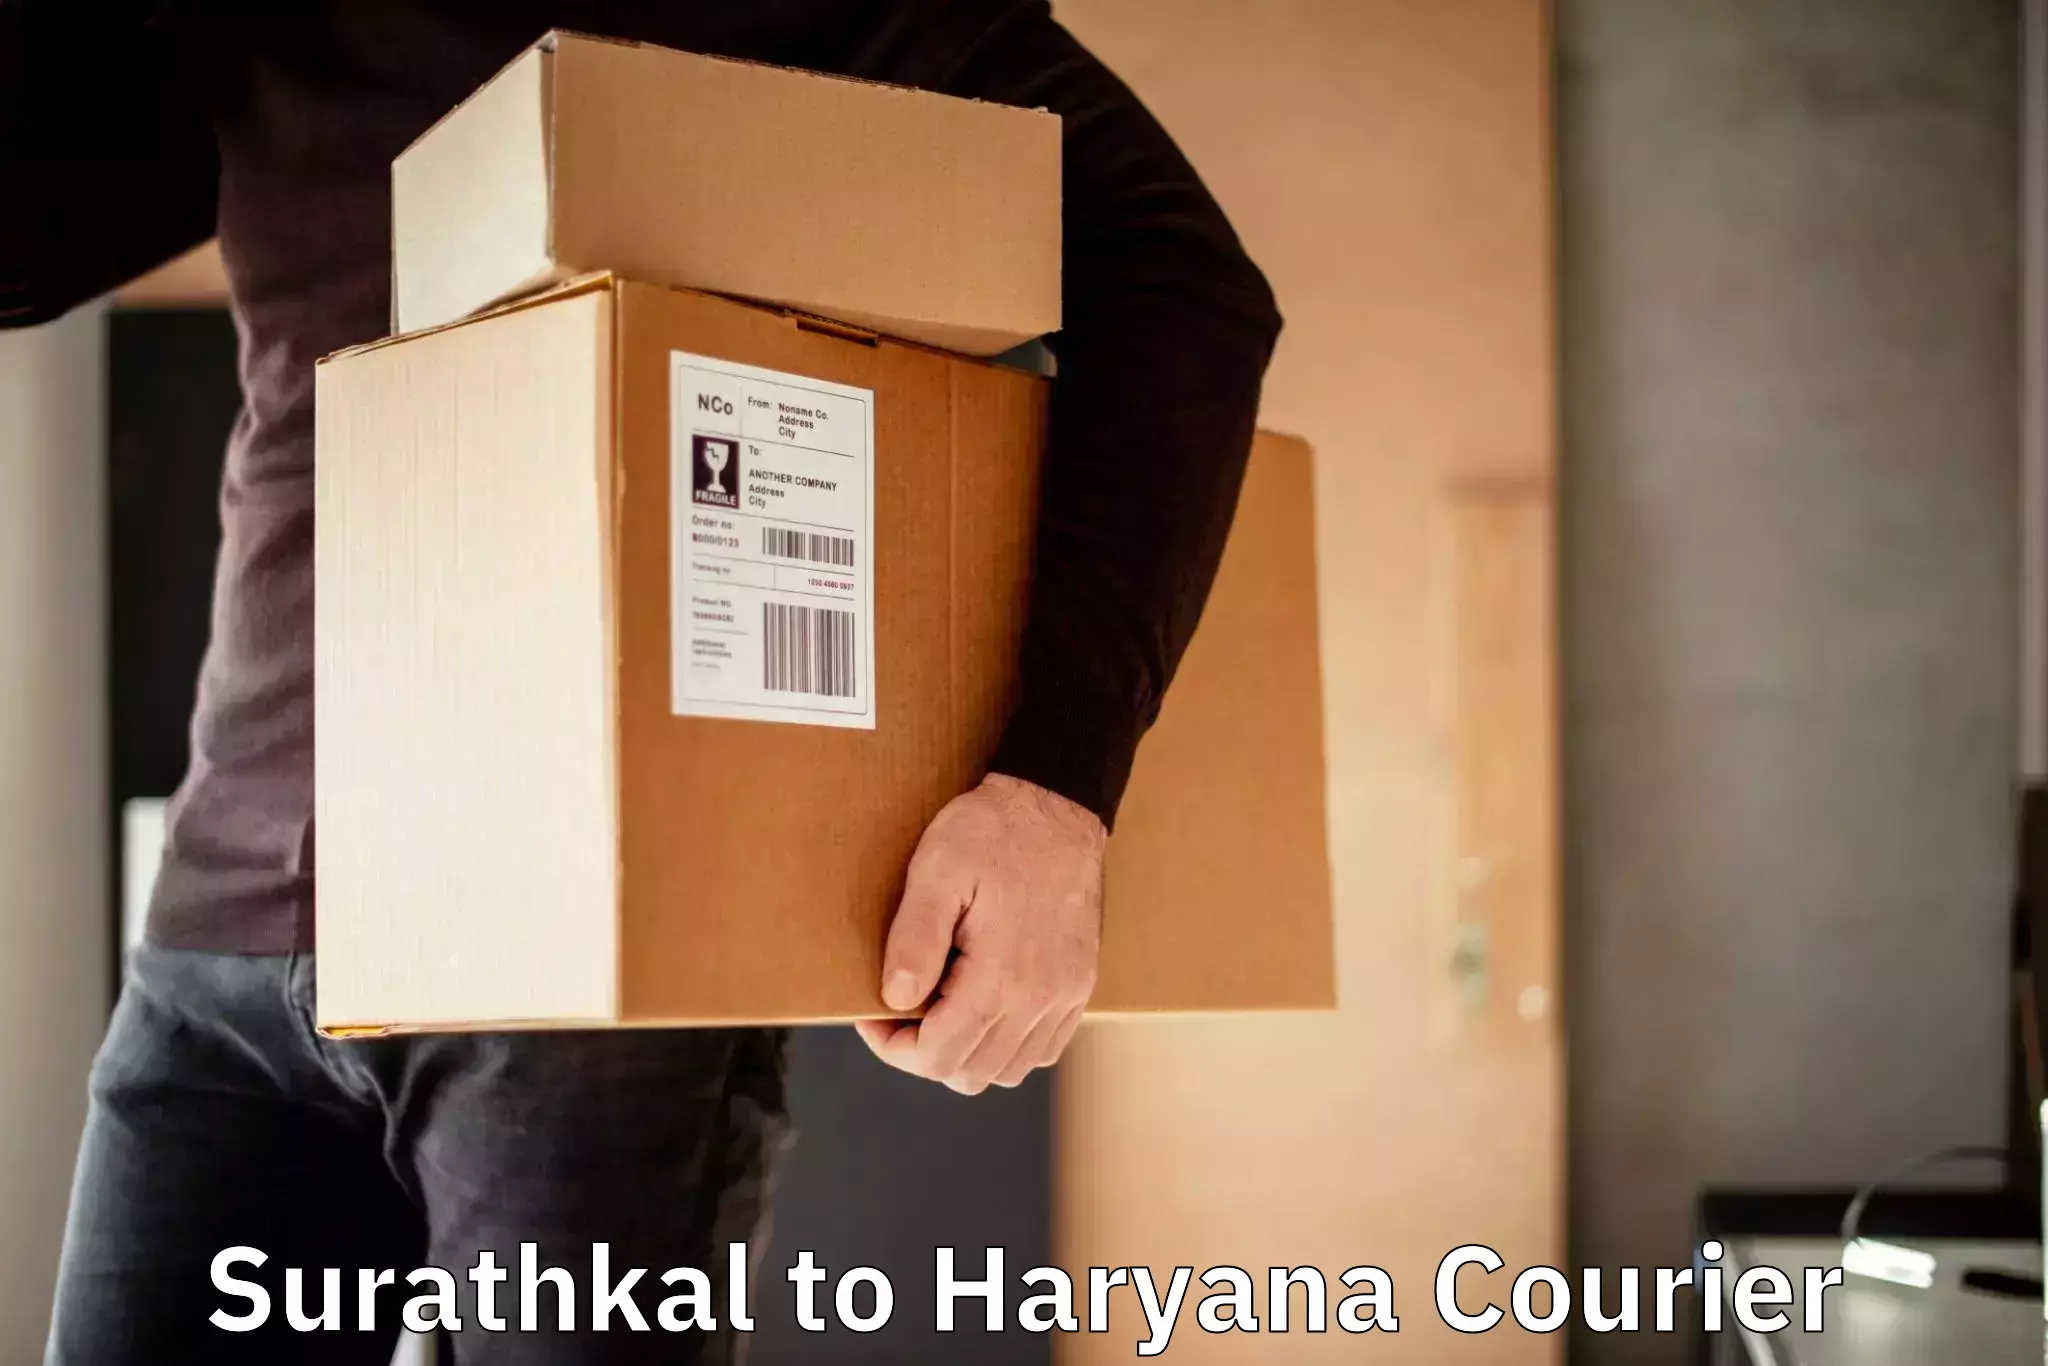 On-demand delivery Surathkal to NCR Haryana